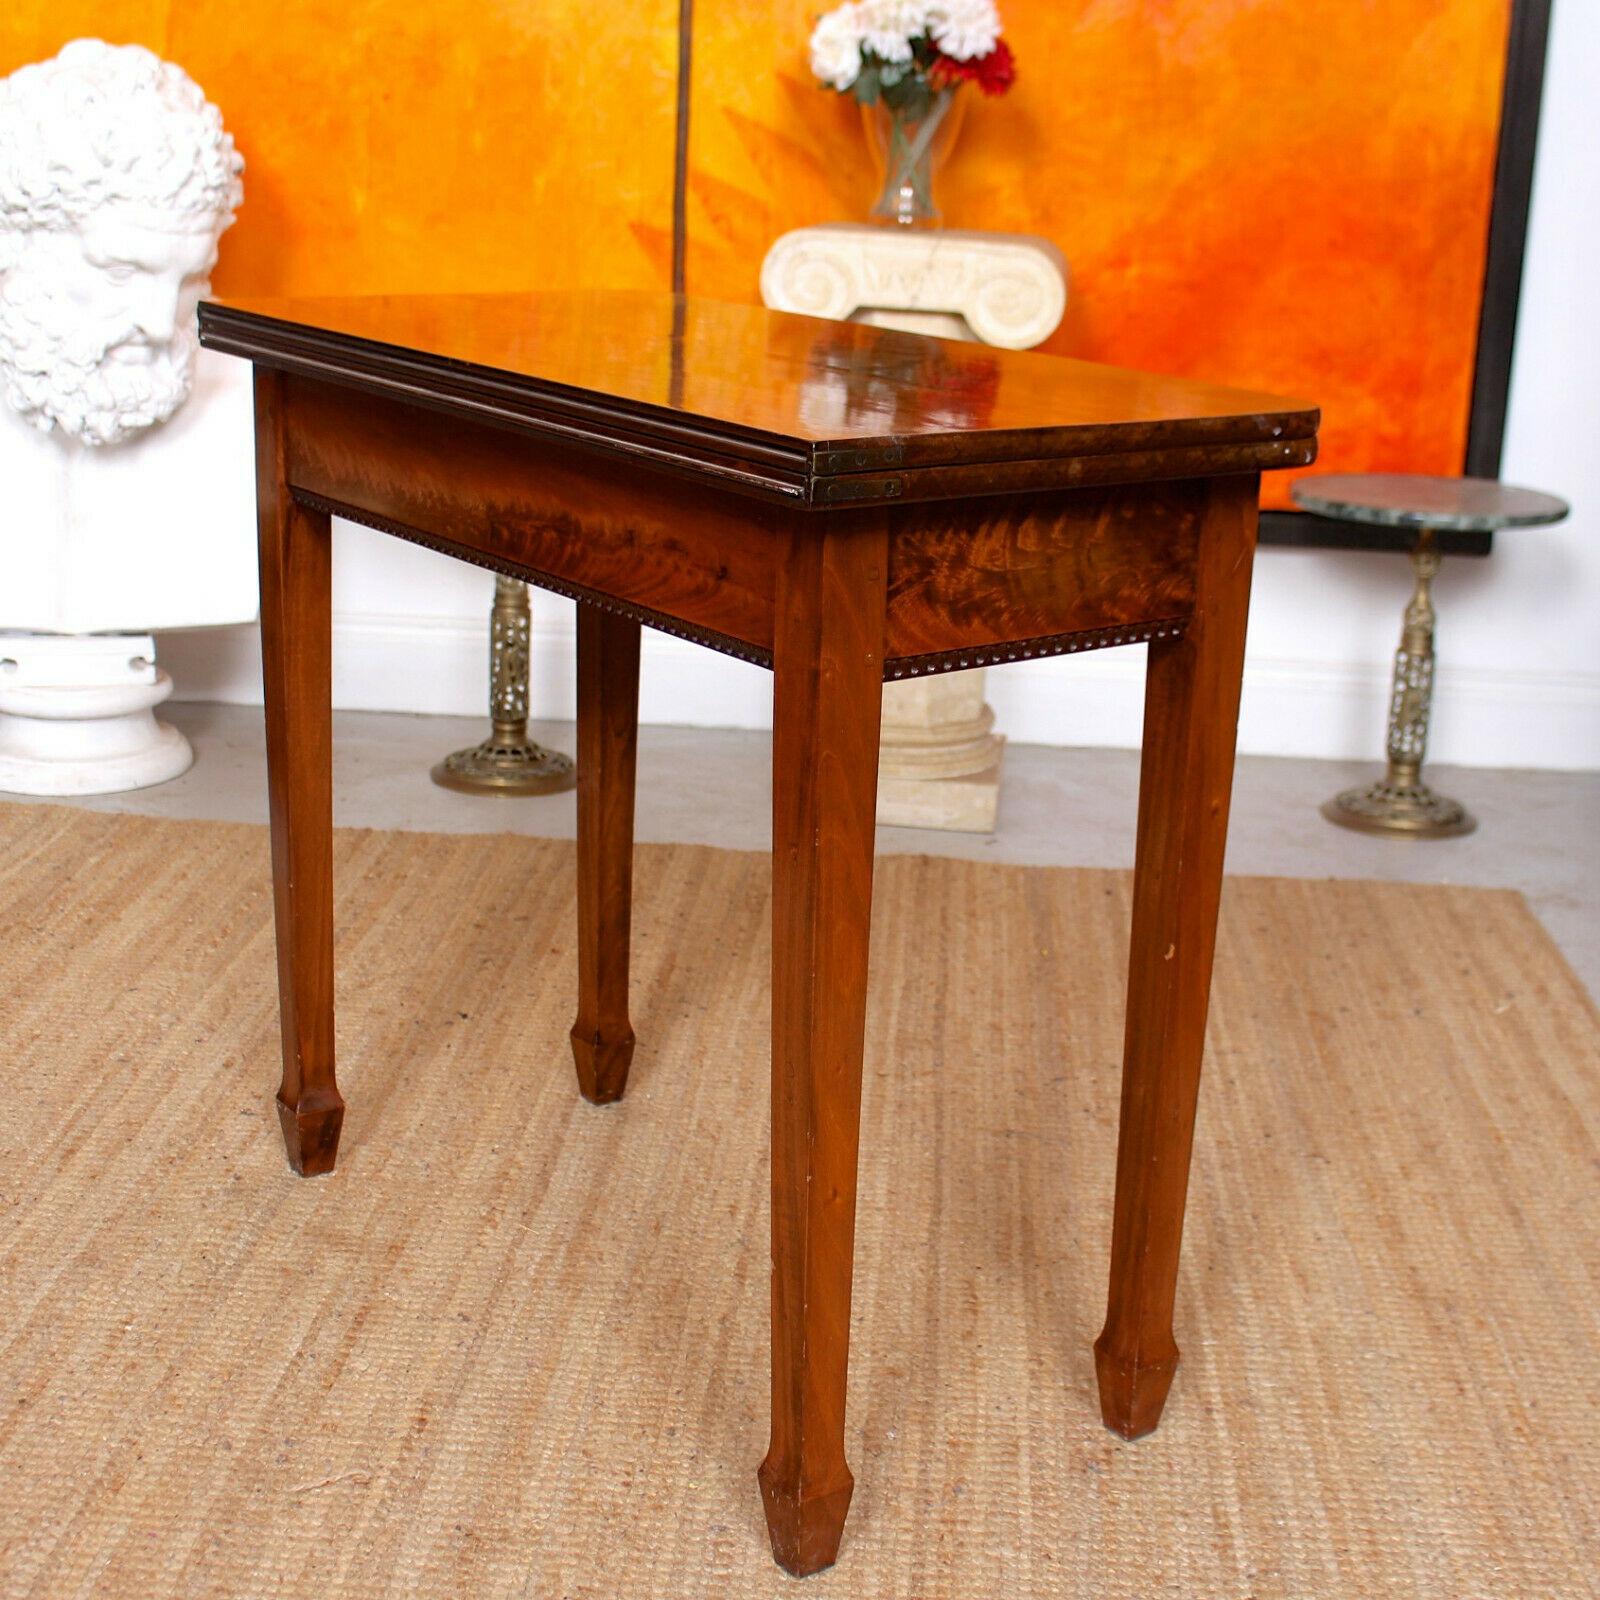 English Writing Table 19th Century Flamed Mahogany Folding Card Console Table For Sale 9